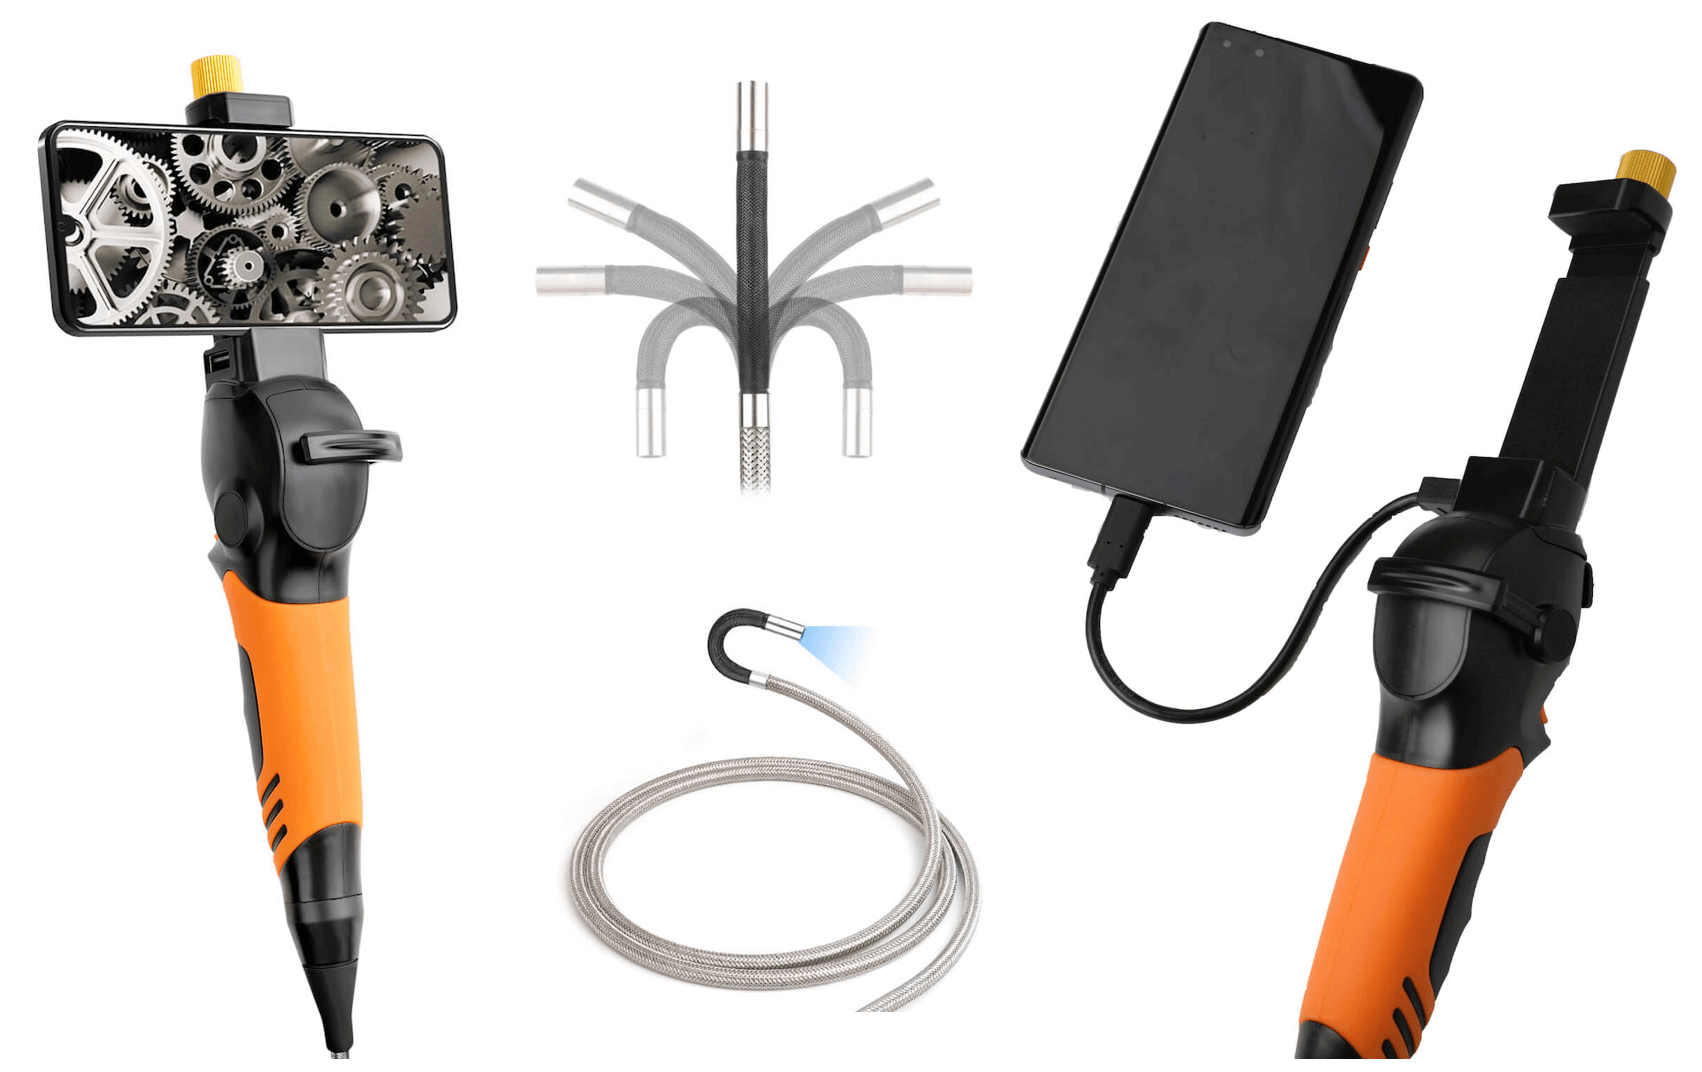 What is an Industrial Borescope